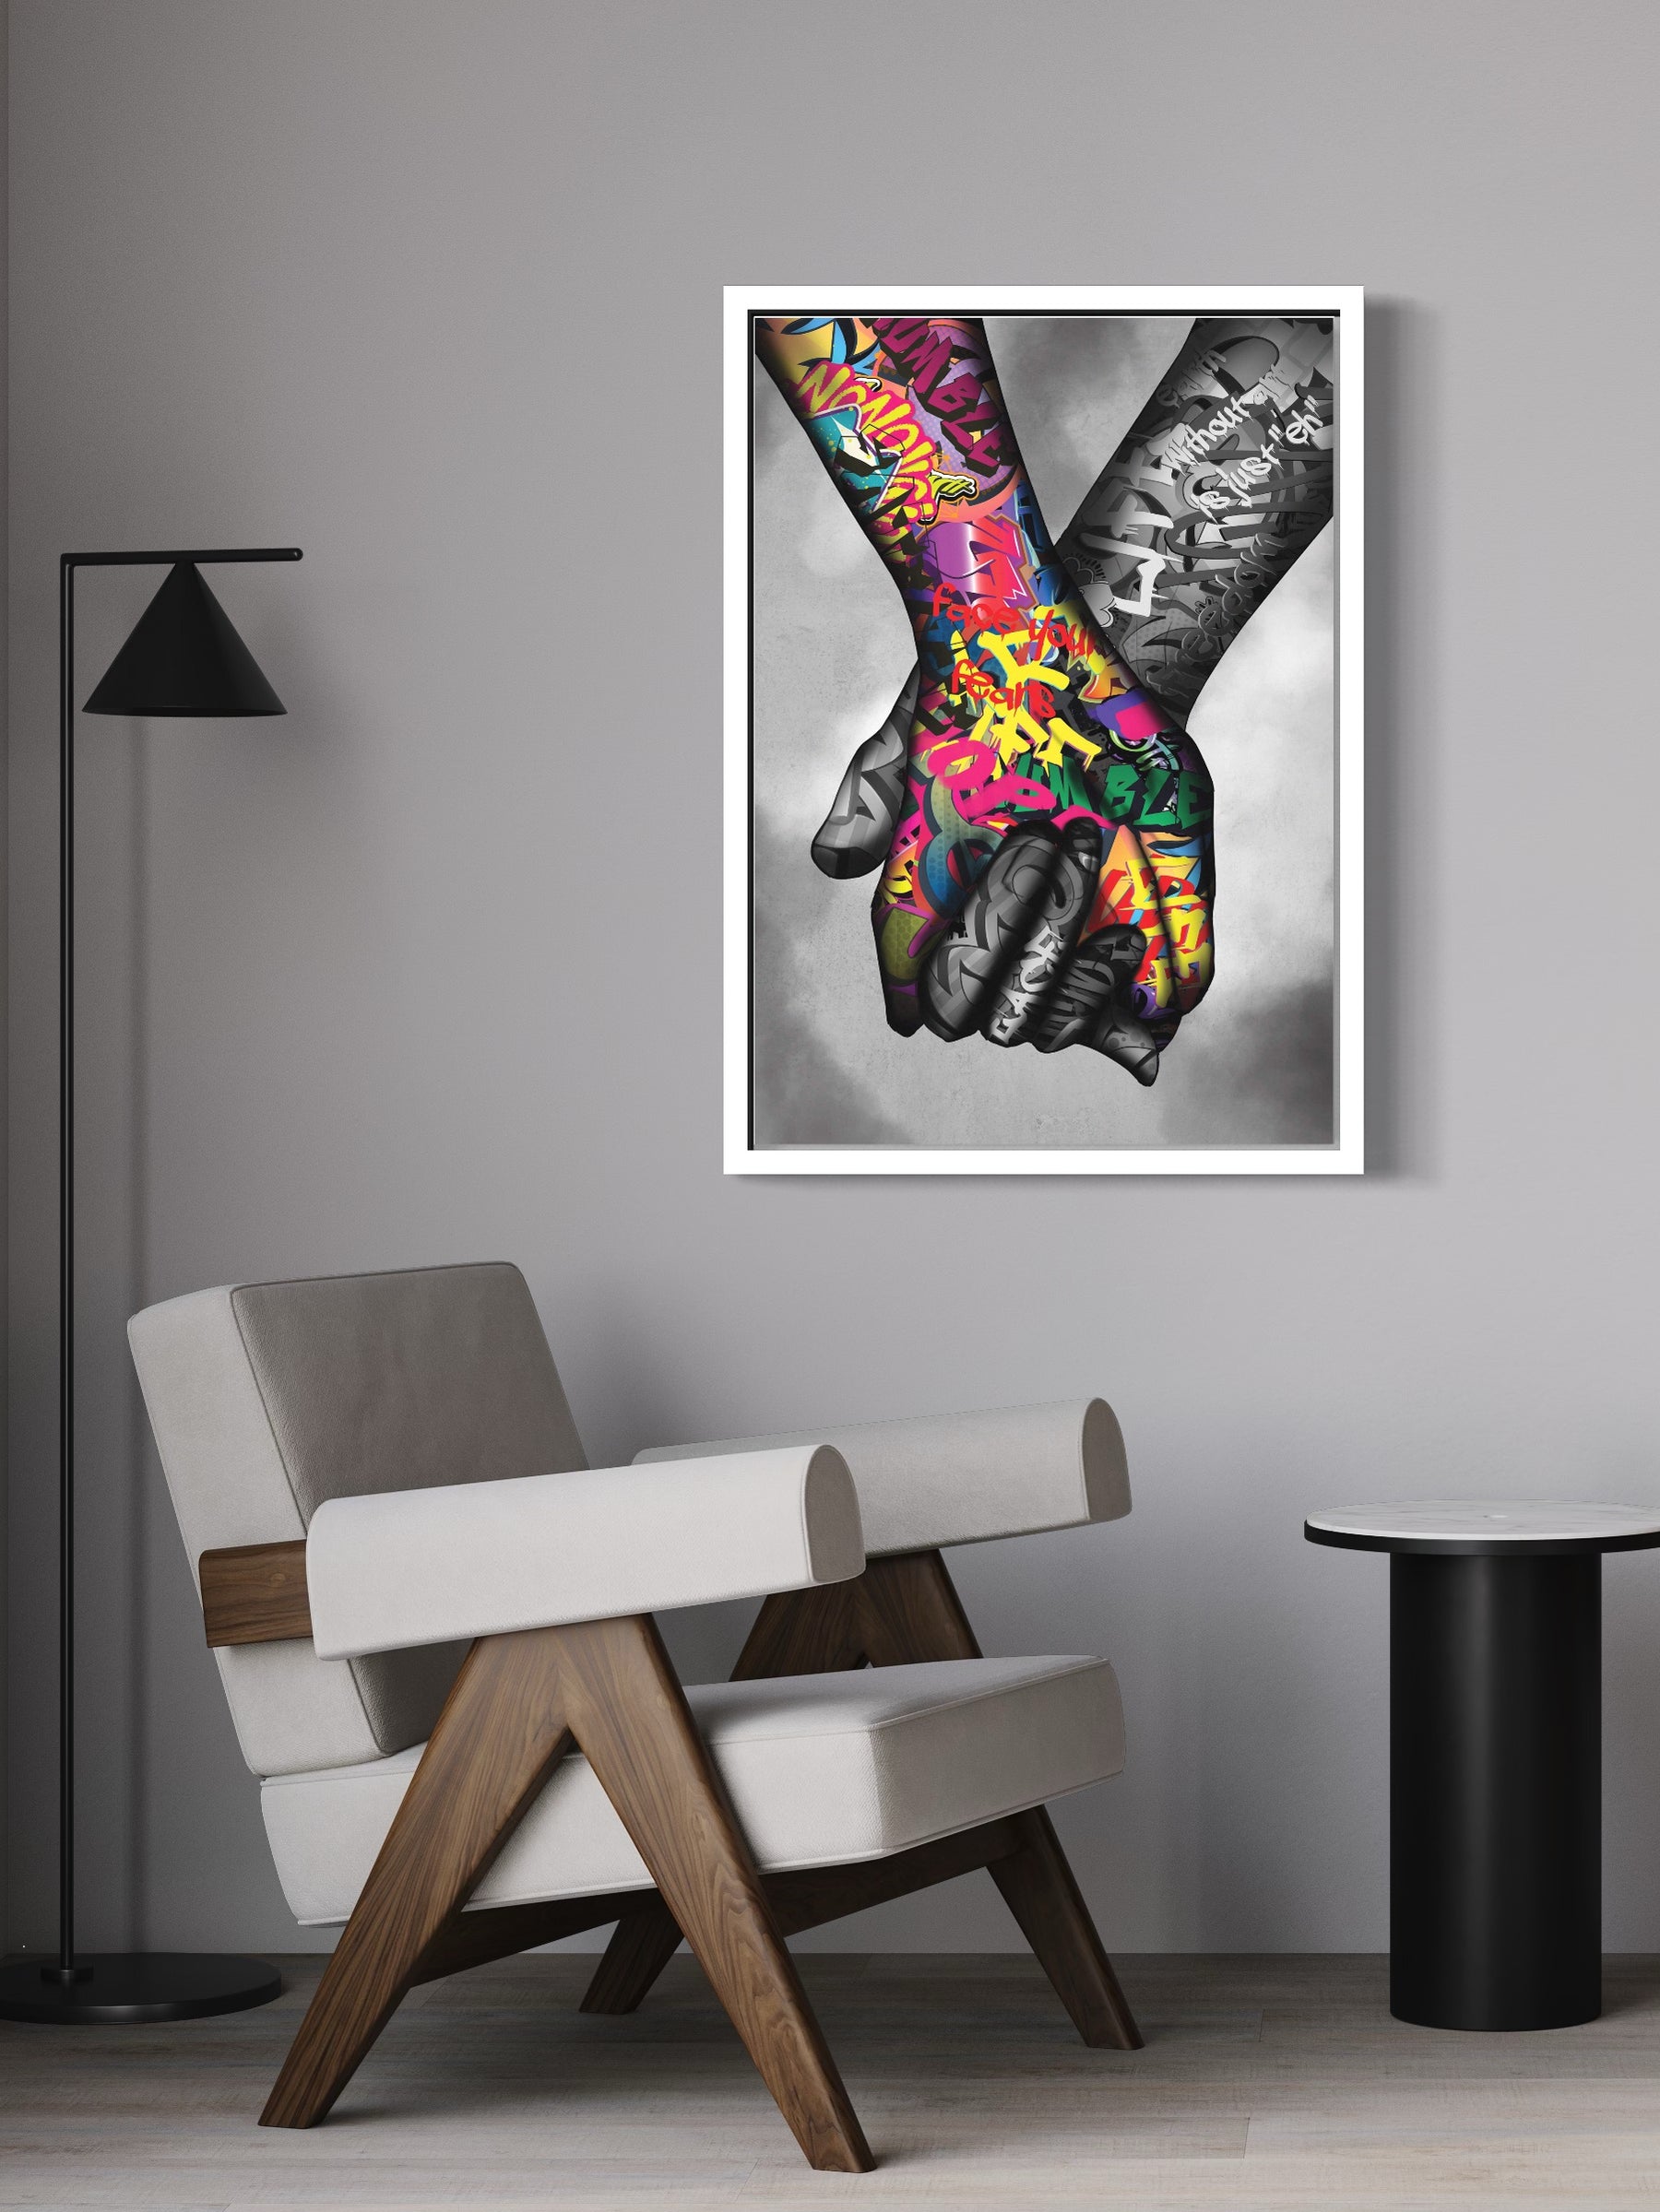 STRONGER TOGETHER - GRAFFITI STYLE CANVAS WALL ART